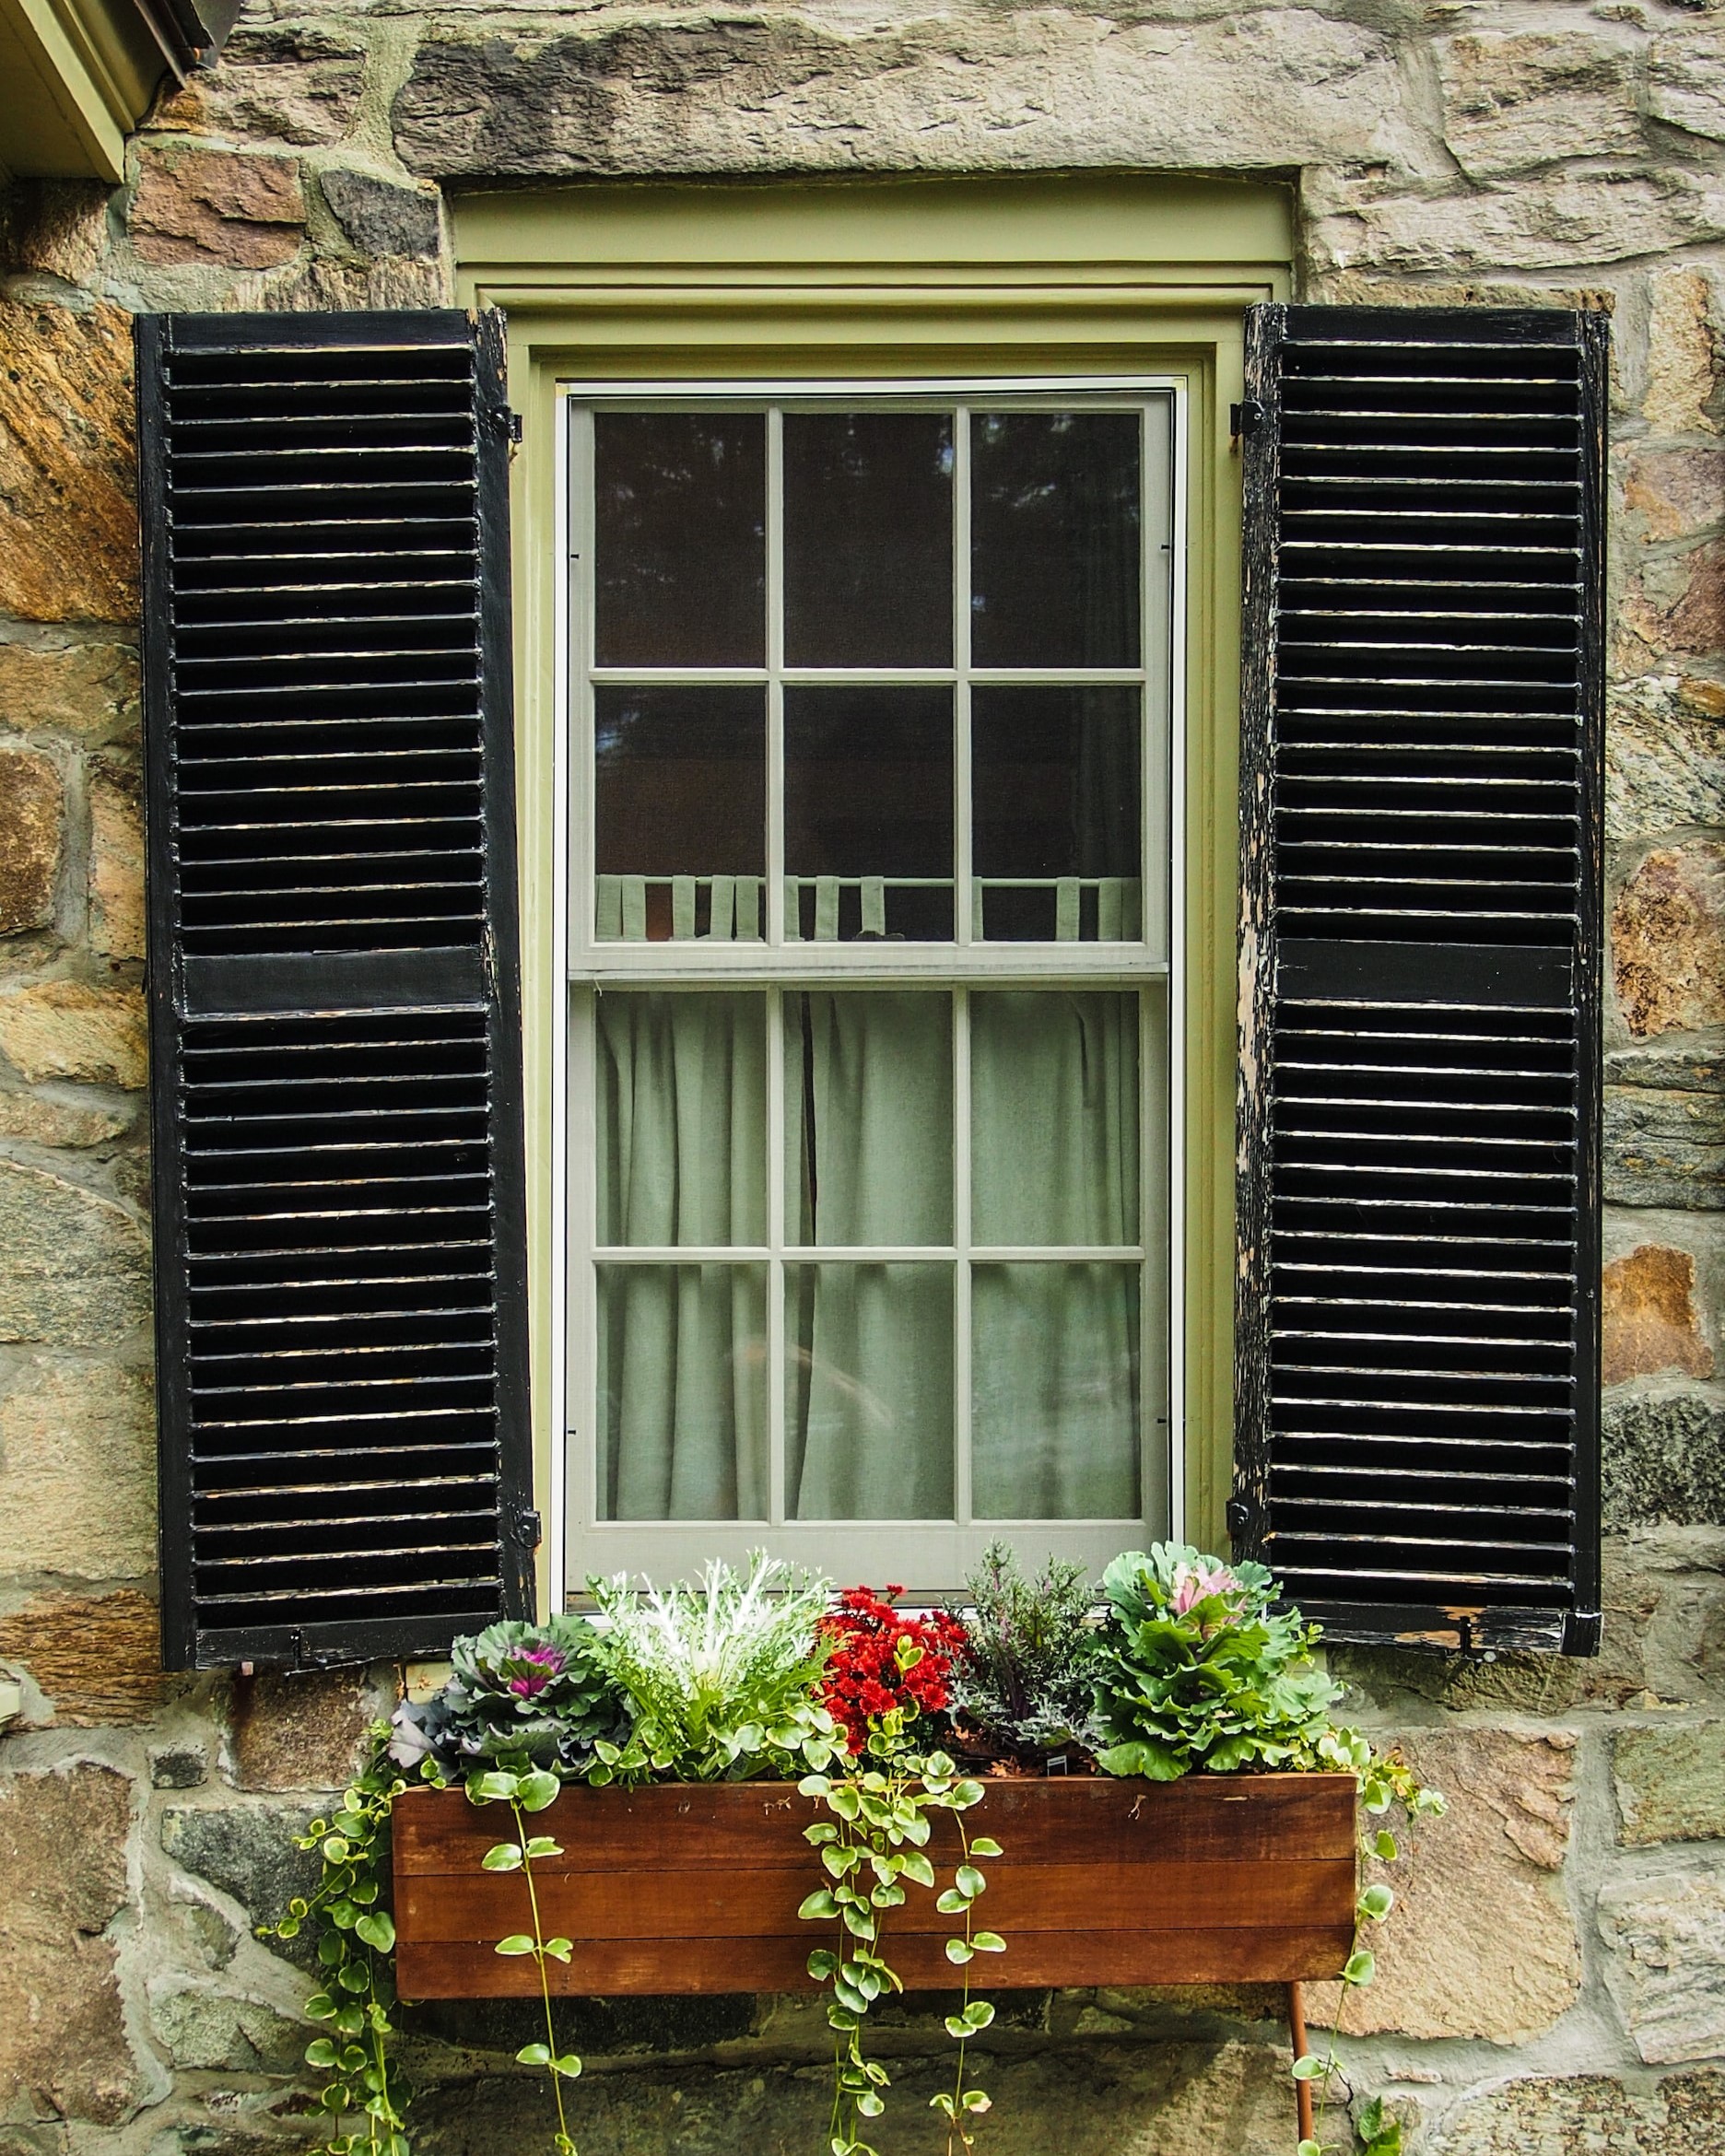 Window Box in front of a window with shutters